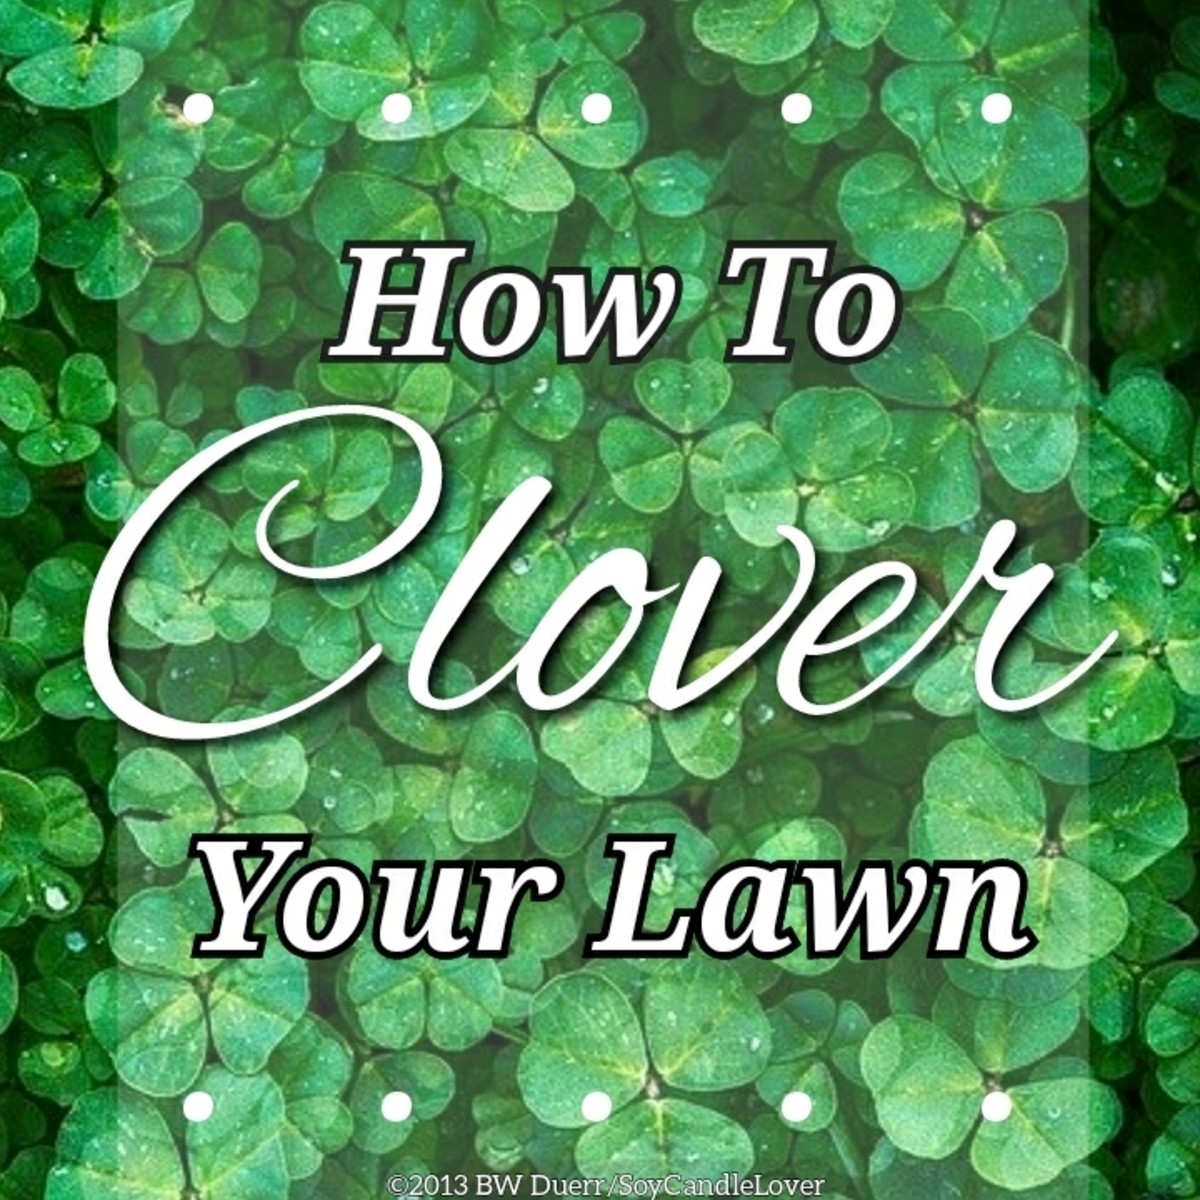 How to Start and Grow Clover: The Ecological Lawn Alternative